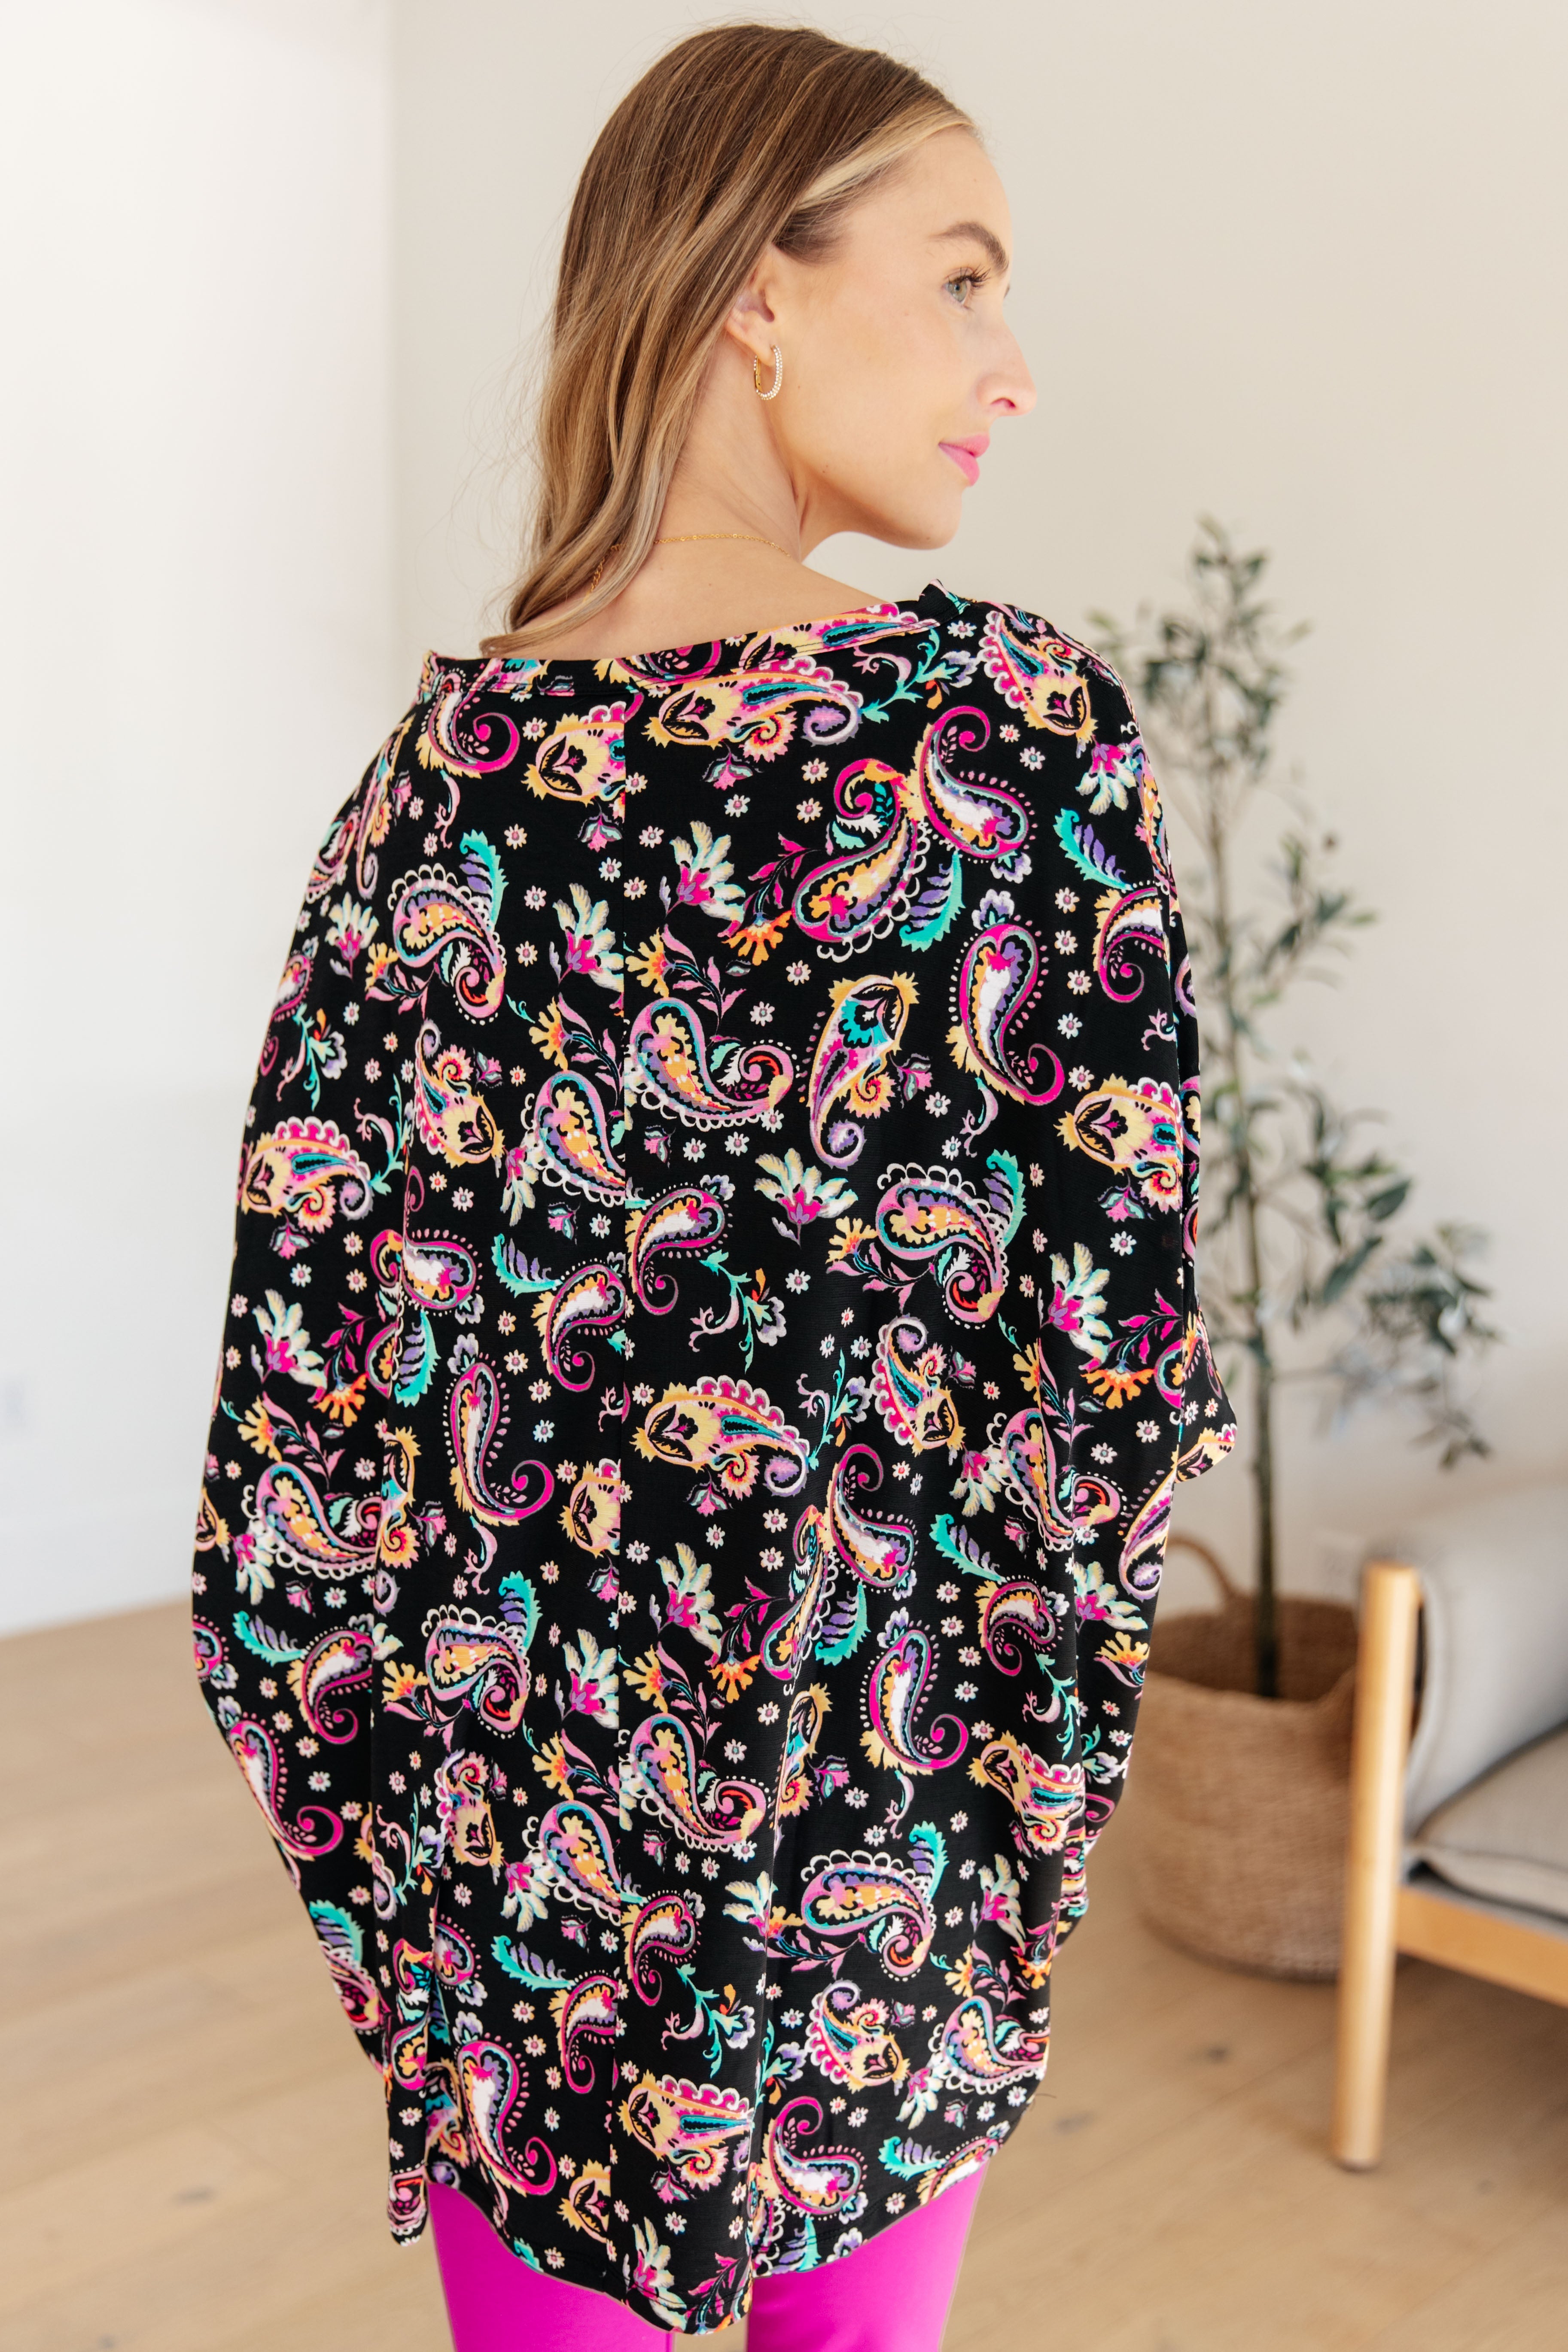 Dear Scarlett Essential Blouse in Black and Pink Paisley